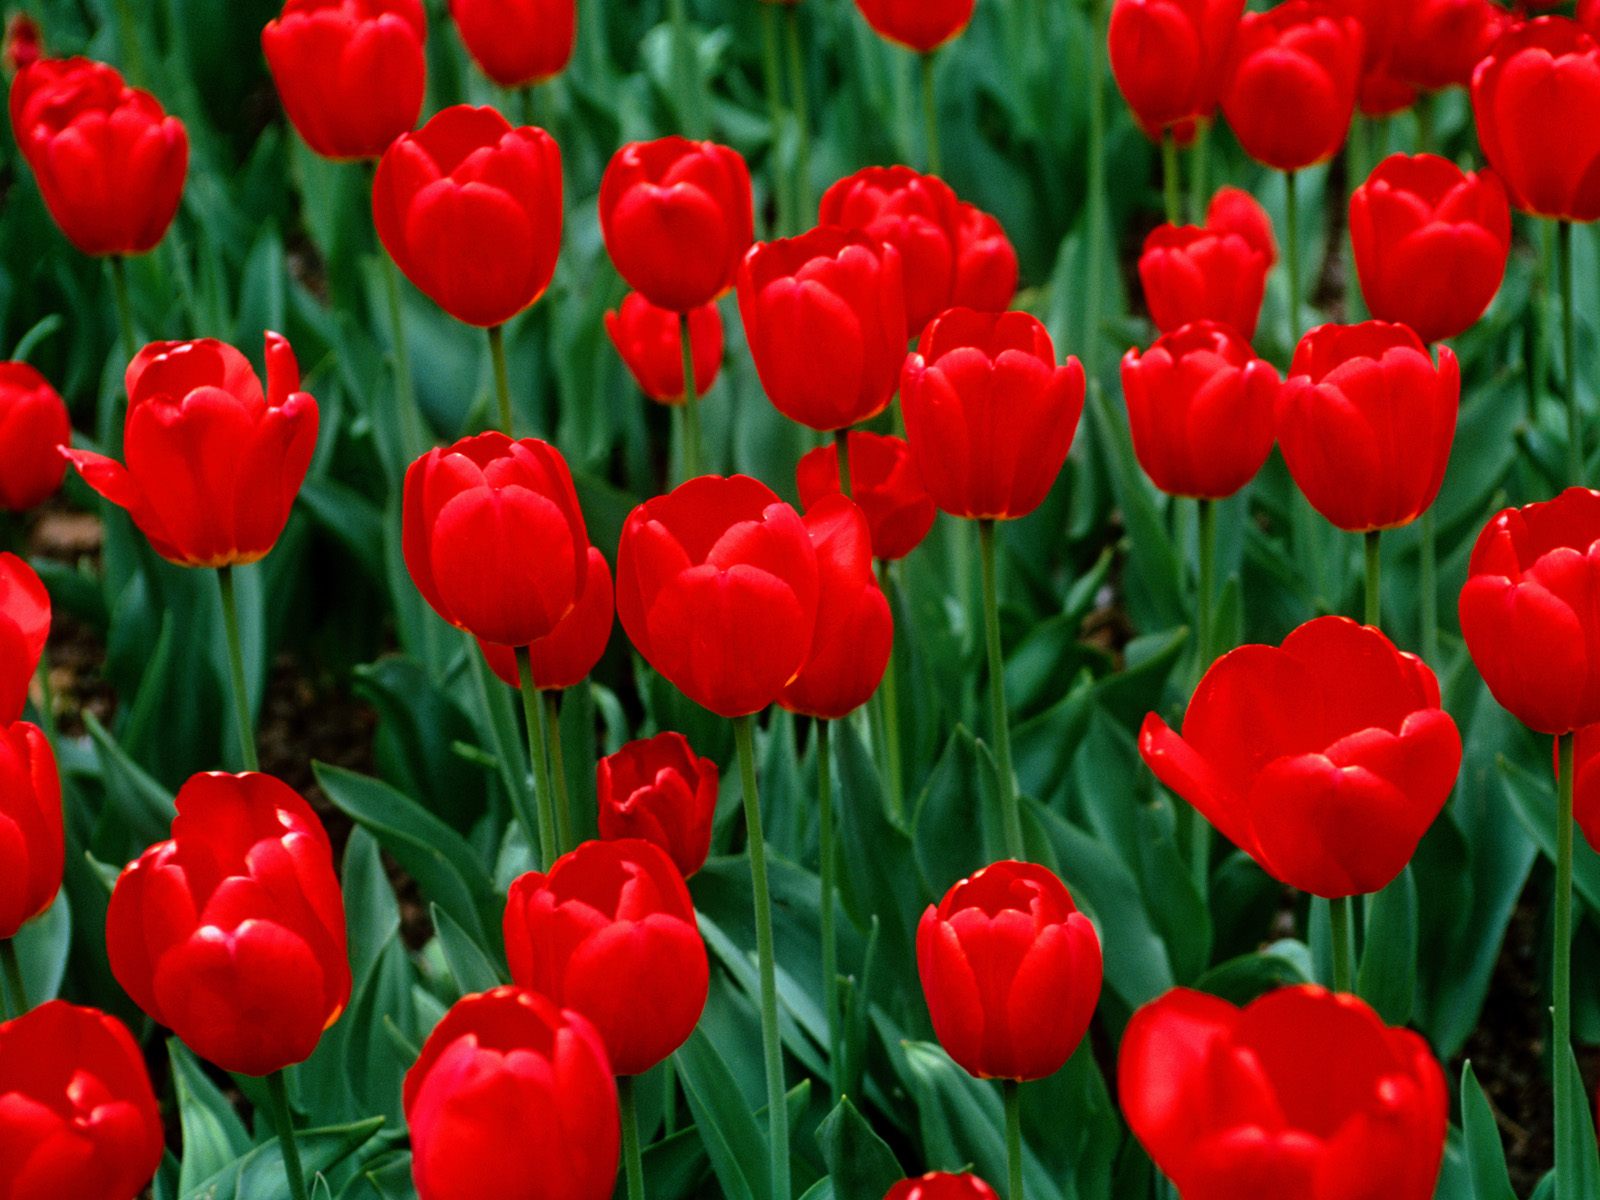 Tulips: This Is Tulips: